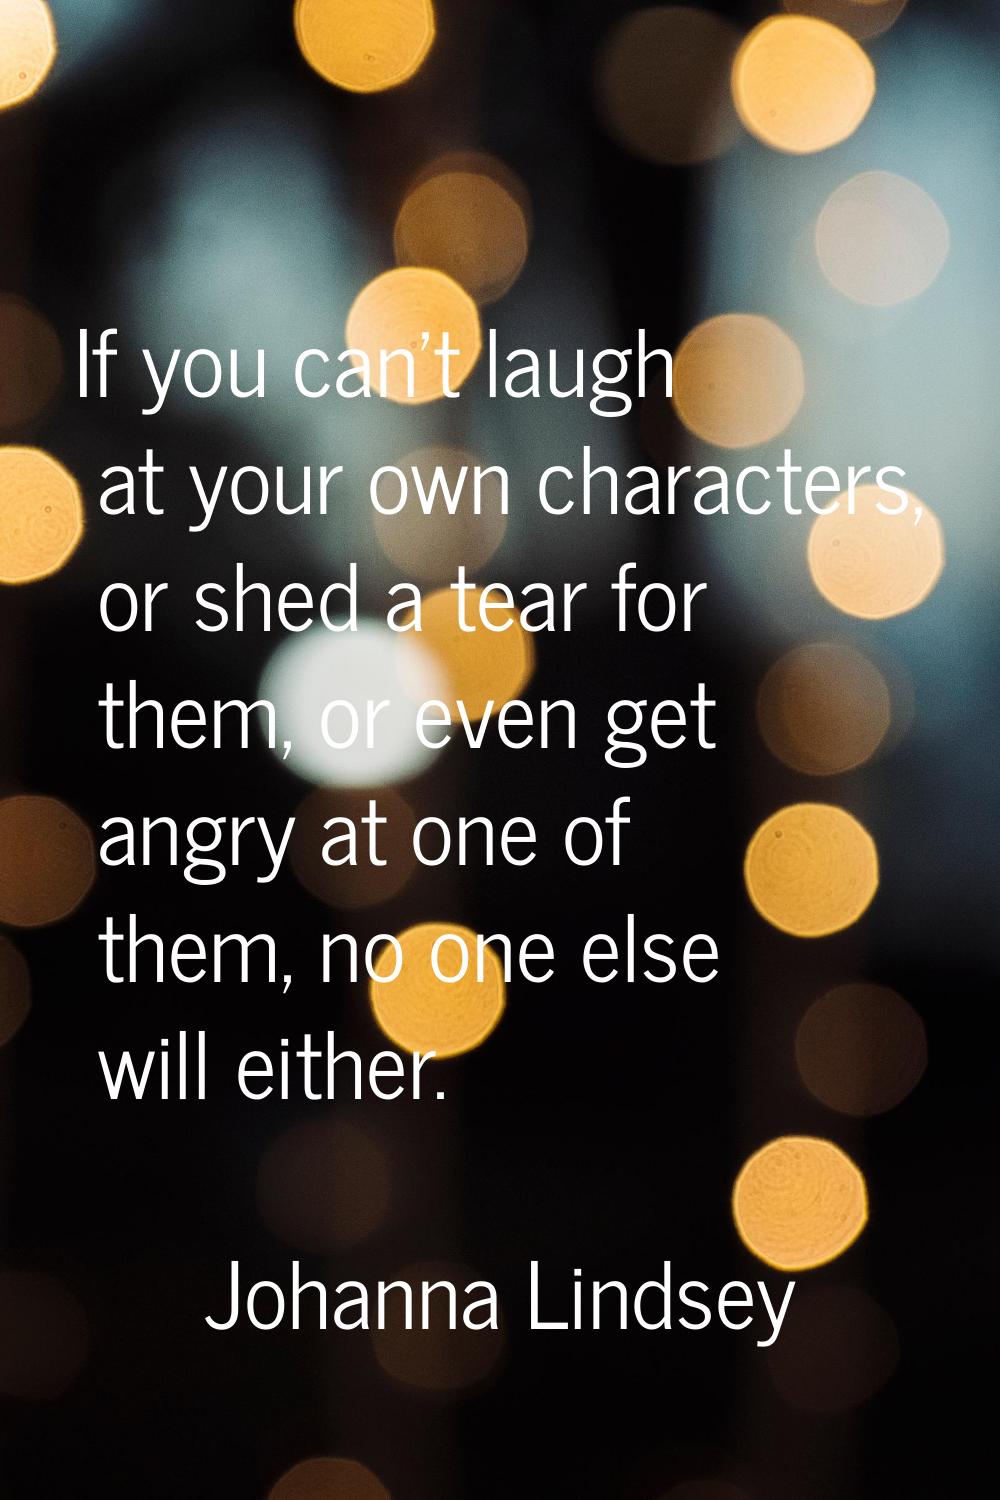 If you can't laugh at your own characters, or shed a tear for them, or even get angry at one of the